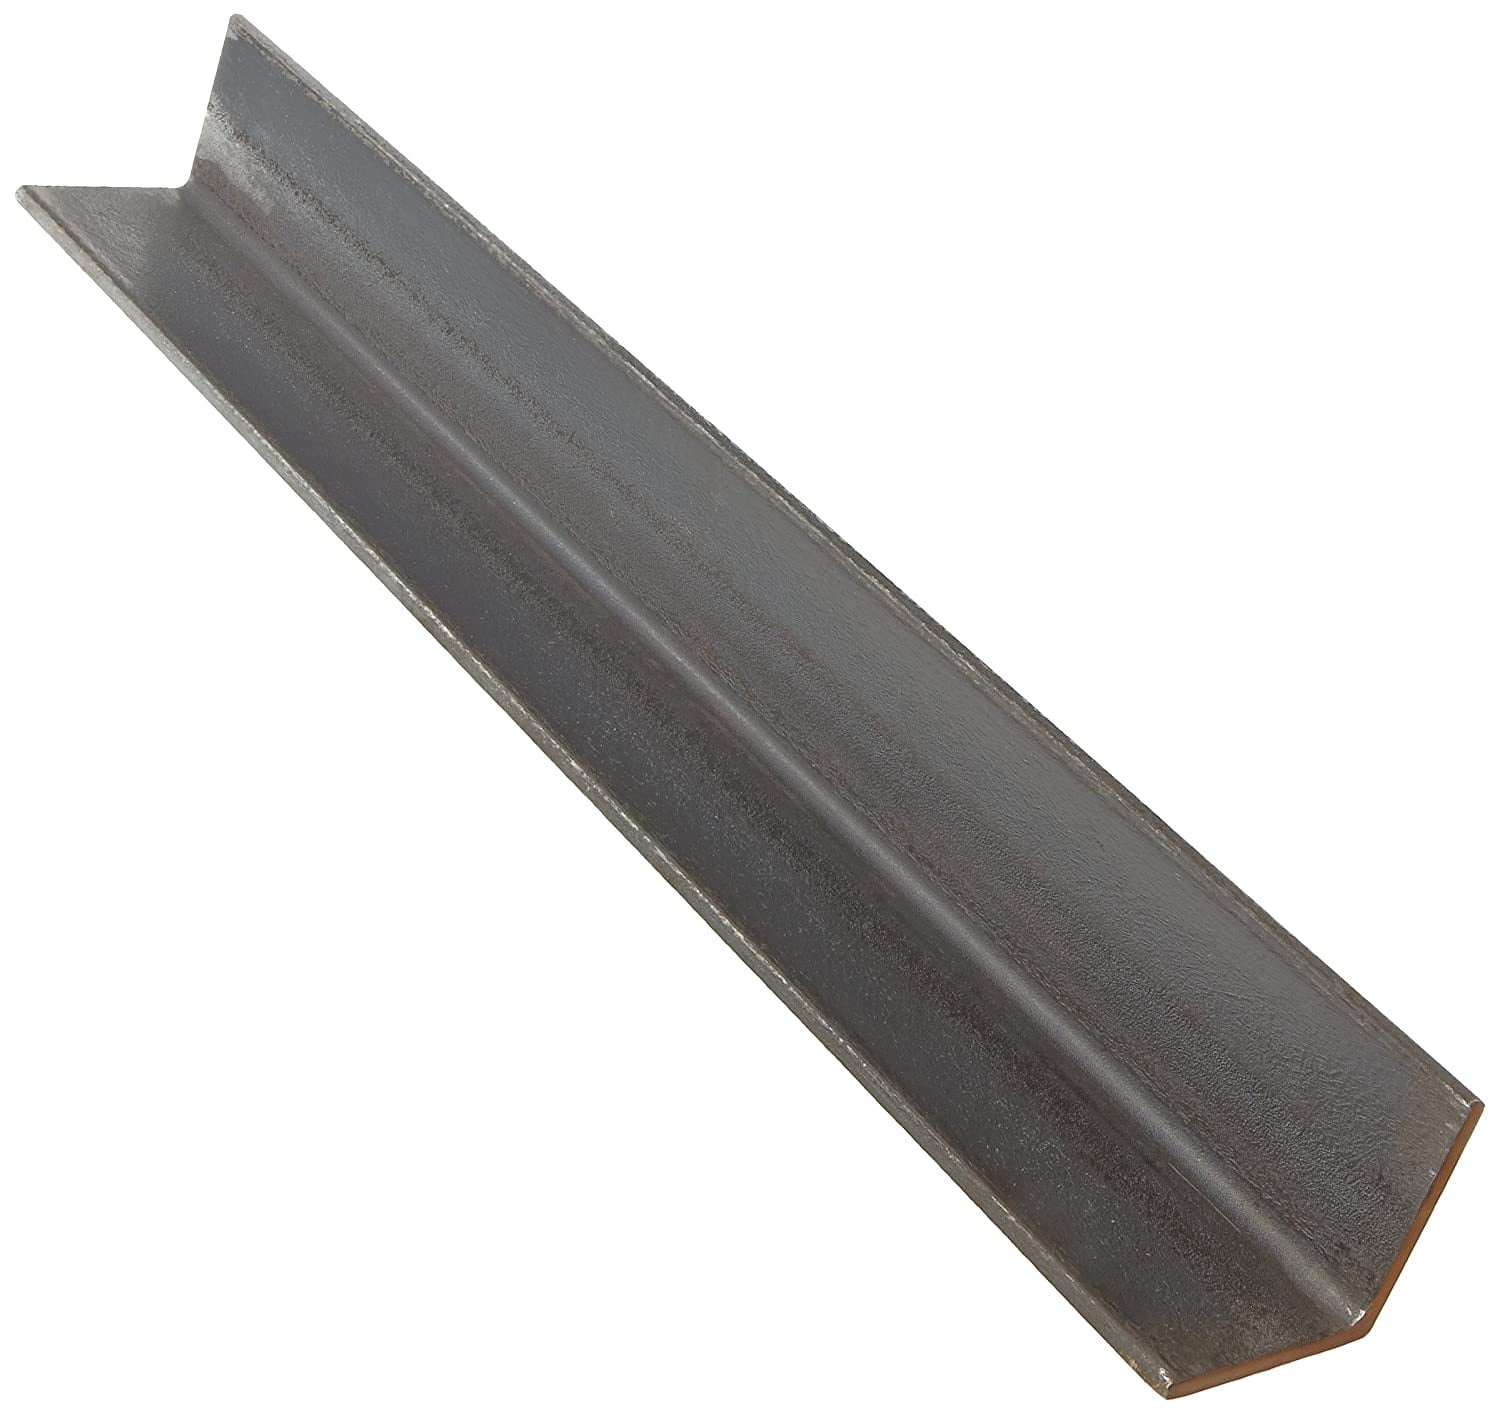 72 Length 1/2 Thickness Mill Finish ASTM A36 A36 Steel Rectangular Bar Unpolished 1-1/2 Width